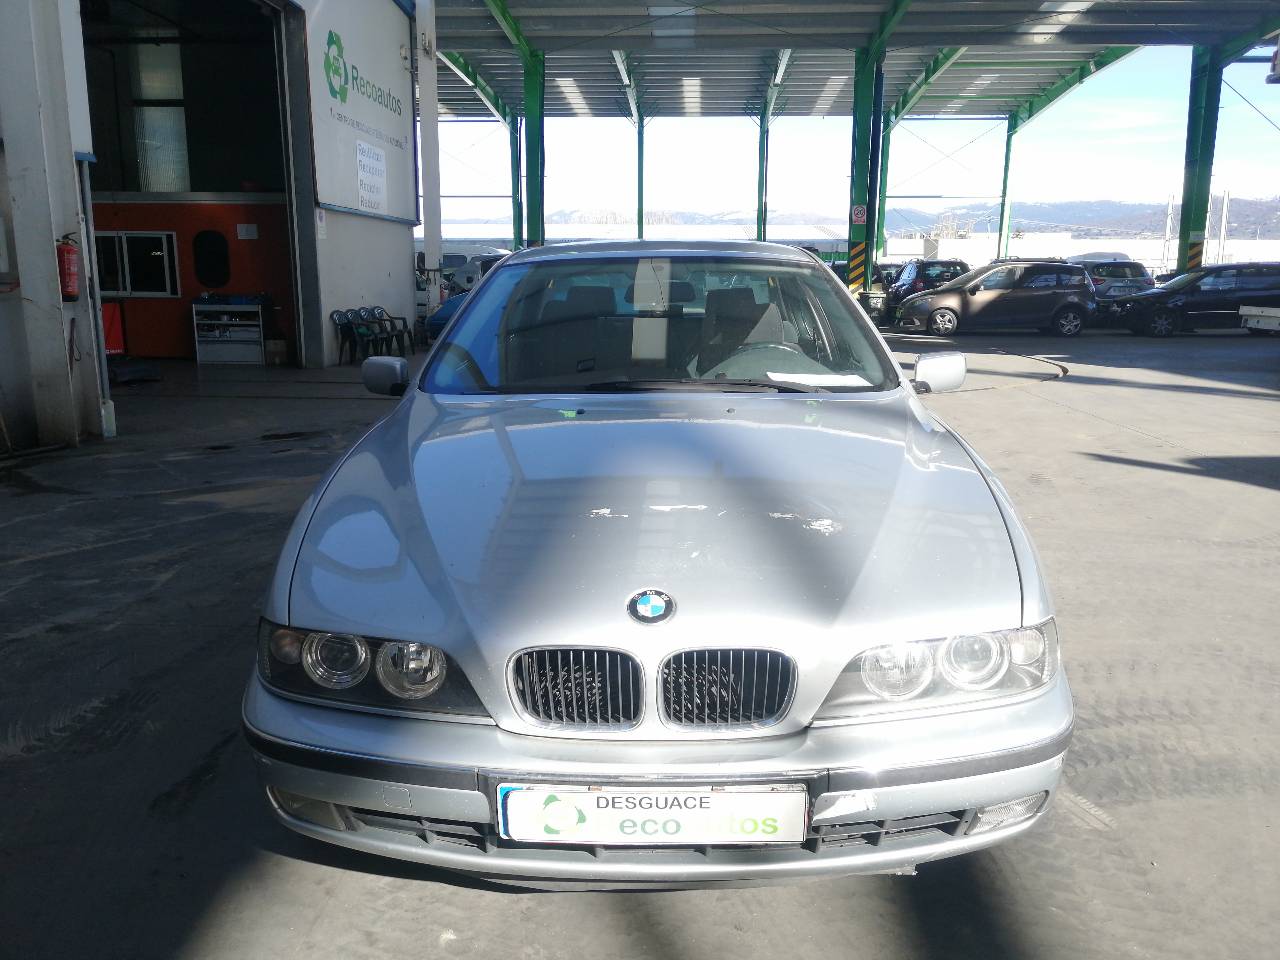 BMW 5 Series E39 (1995-2004) Other Control Units 61318360461, 21318000 24215220